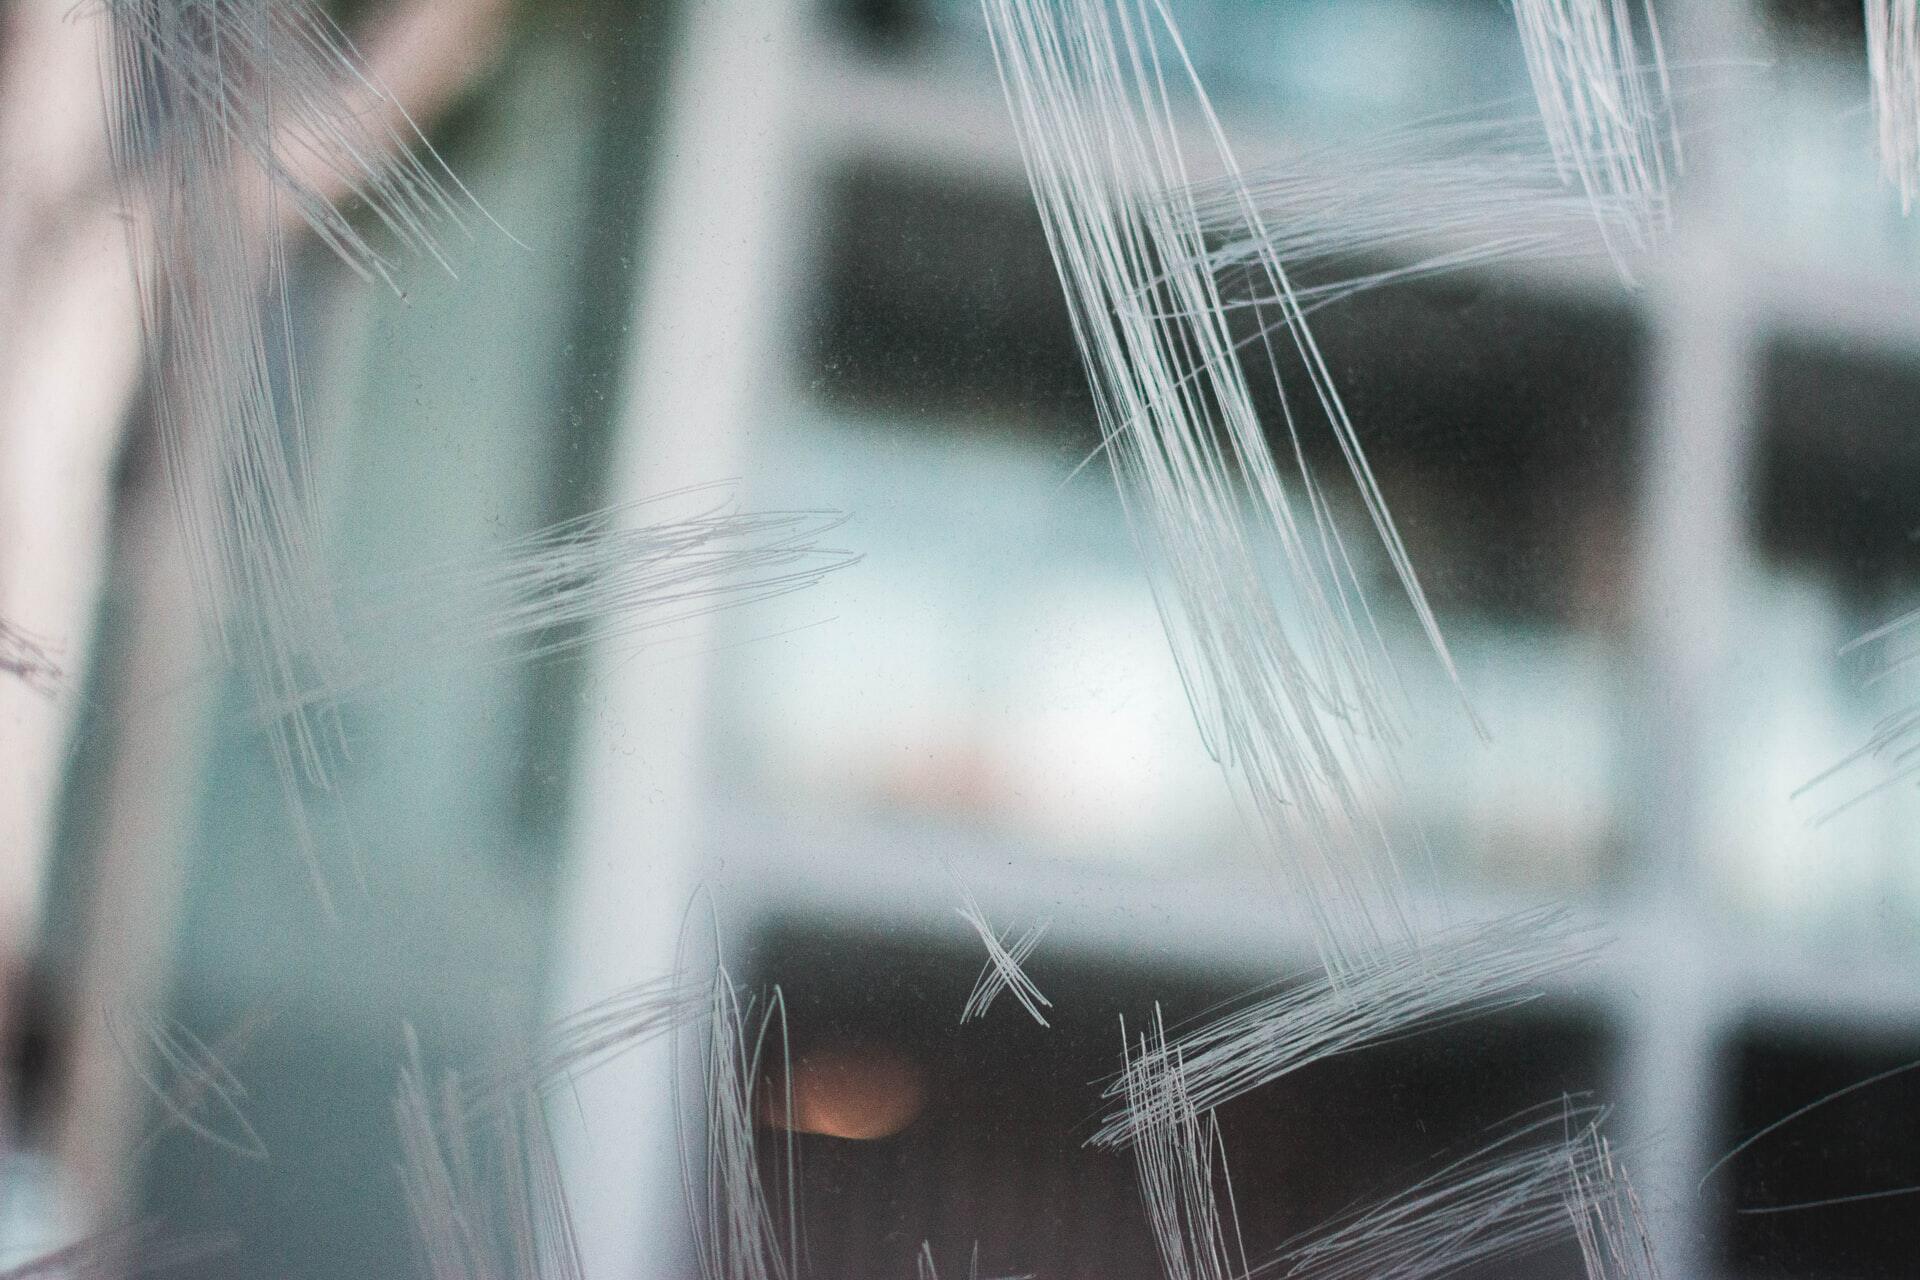 How To Fix Scratches In Glass